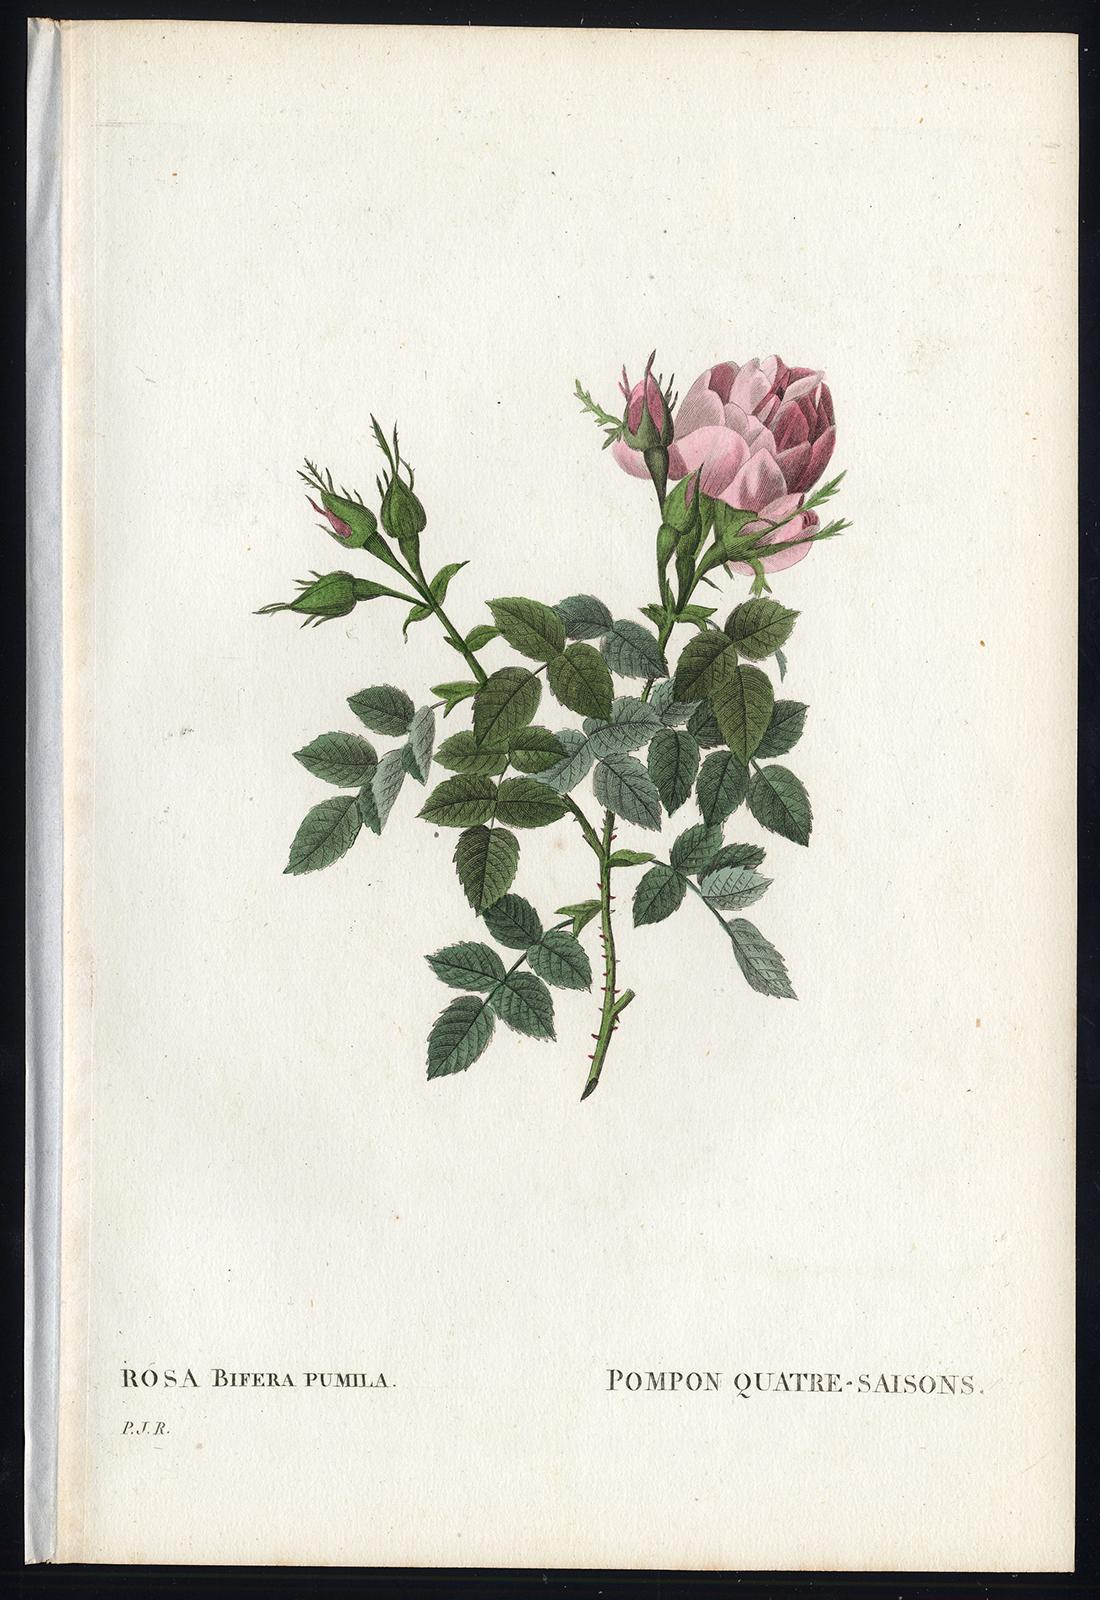 Pierre-Joseph Redouté Print - Small Autumn Damask Rose by Redoute - Handcoloured engraving - 19th century